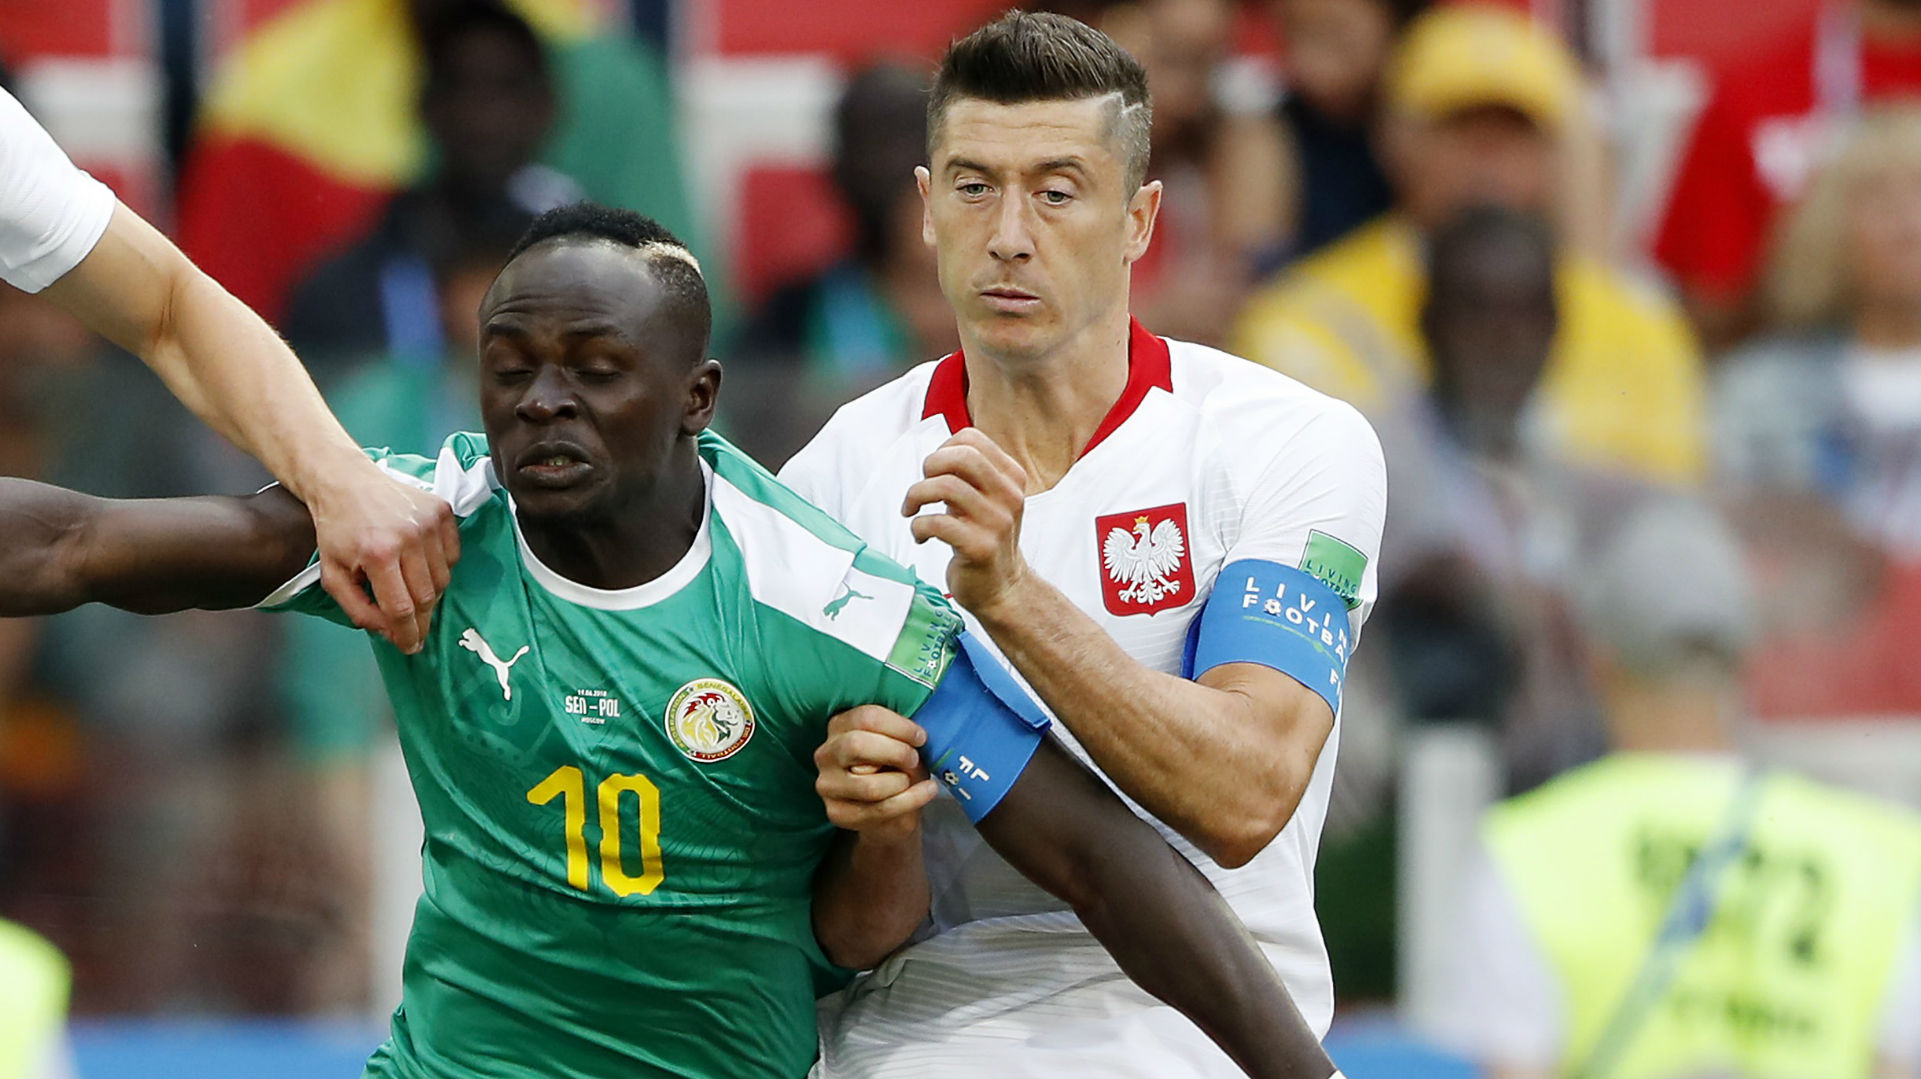 Premier League Transfers: Liverpool star Sadio Mane set to join Bundesliga giants Bayern Munich for a potential €40m fee, Deal agreed until 2025